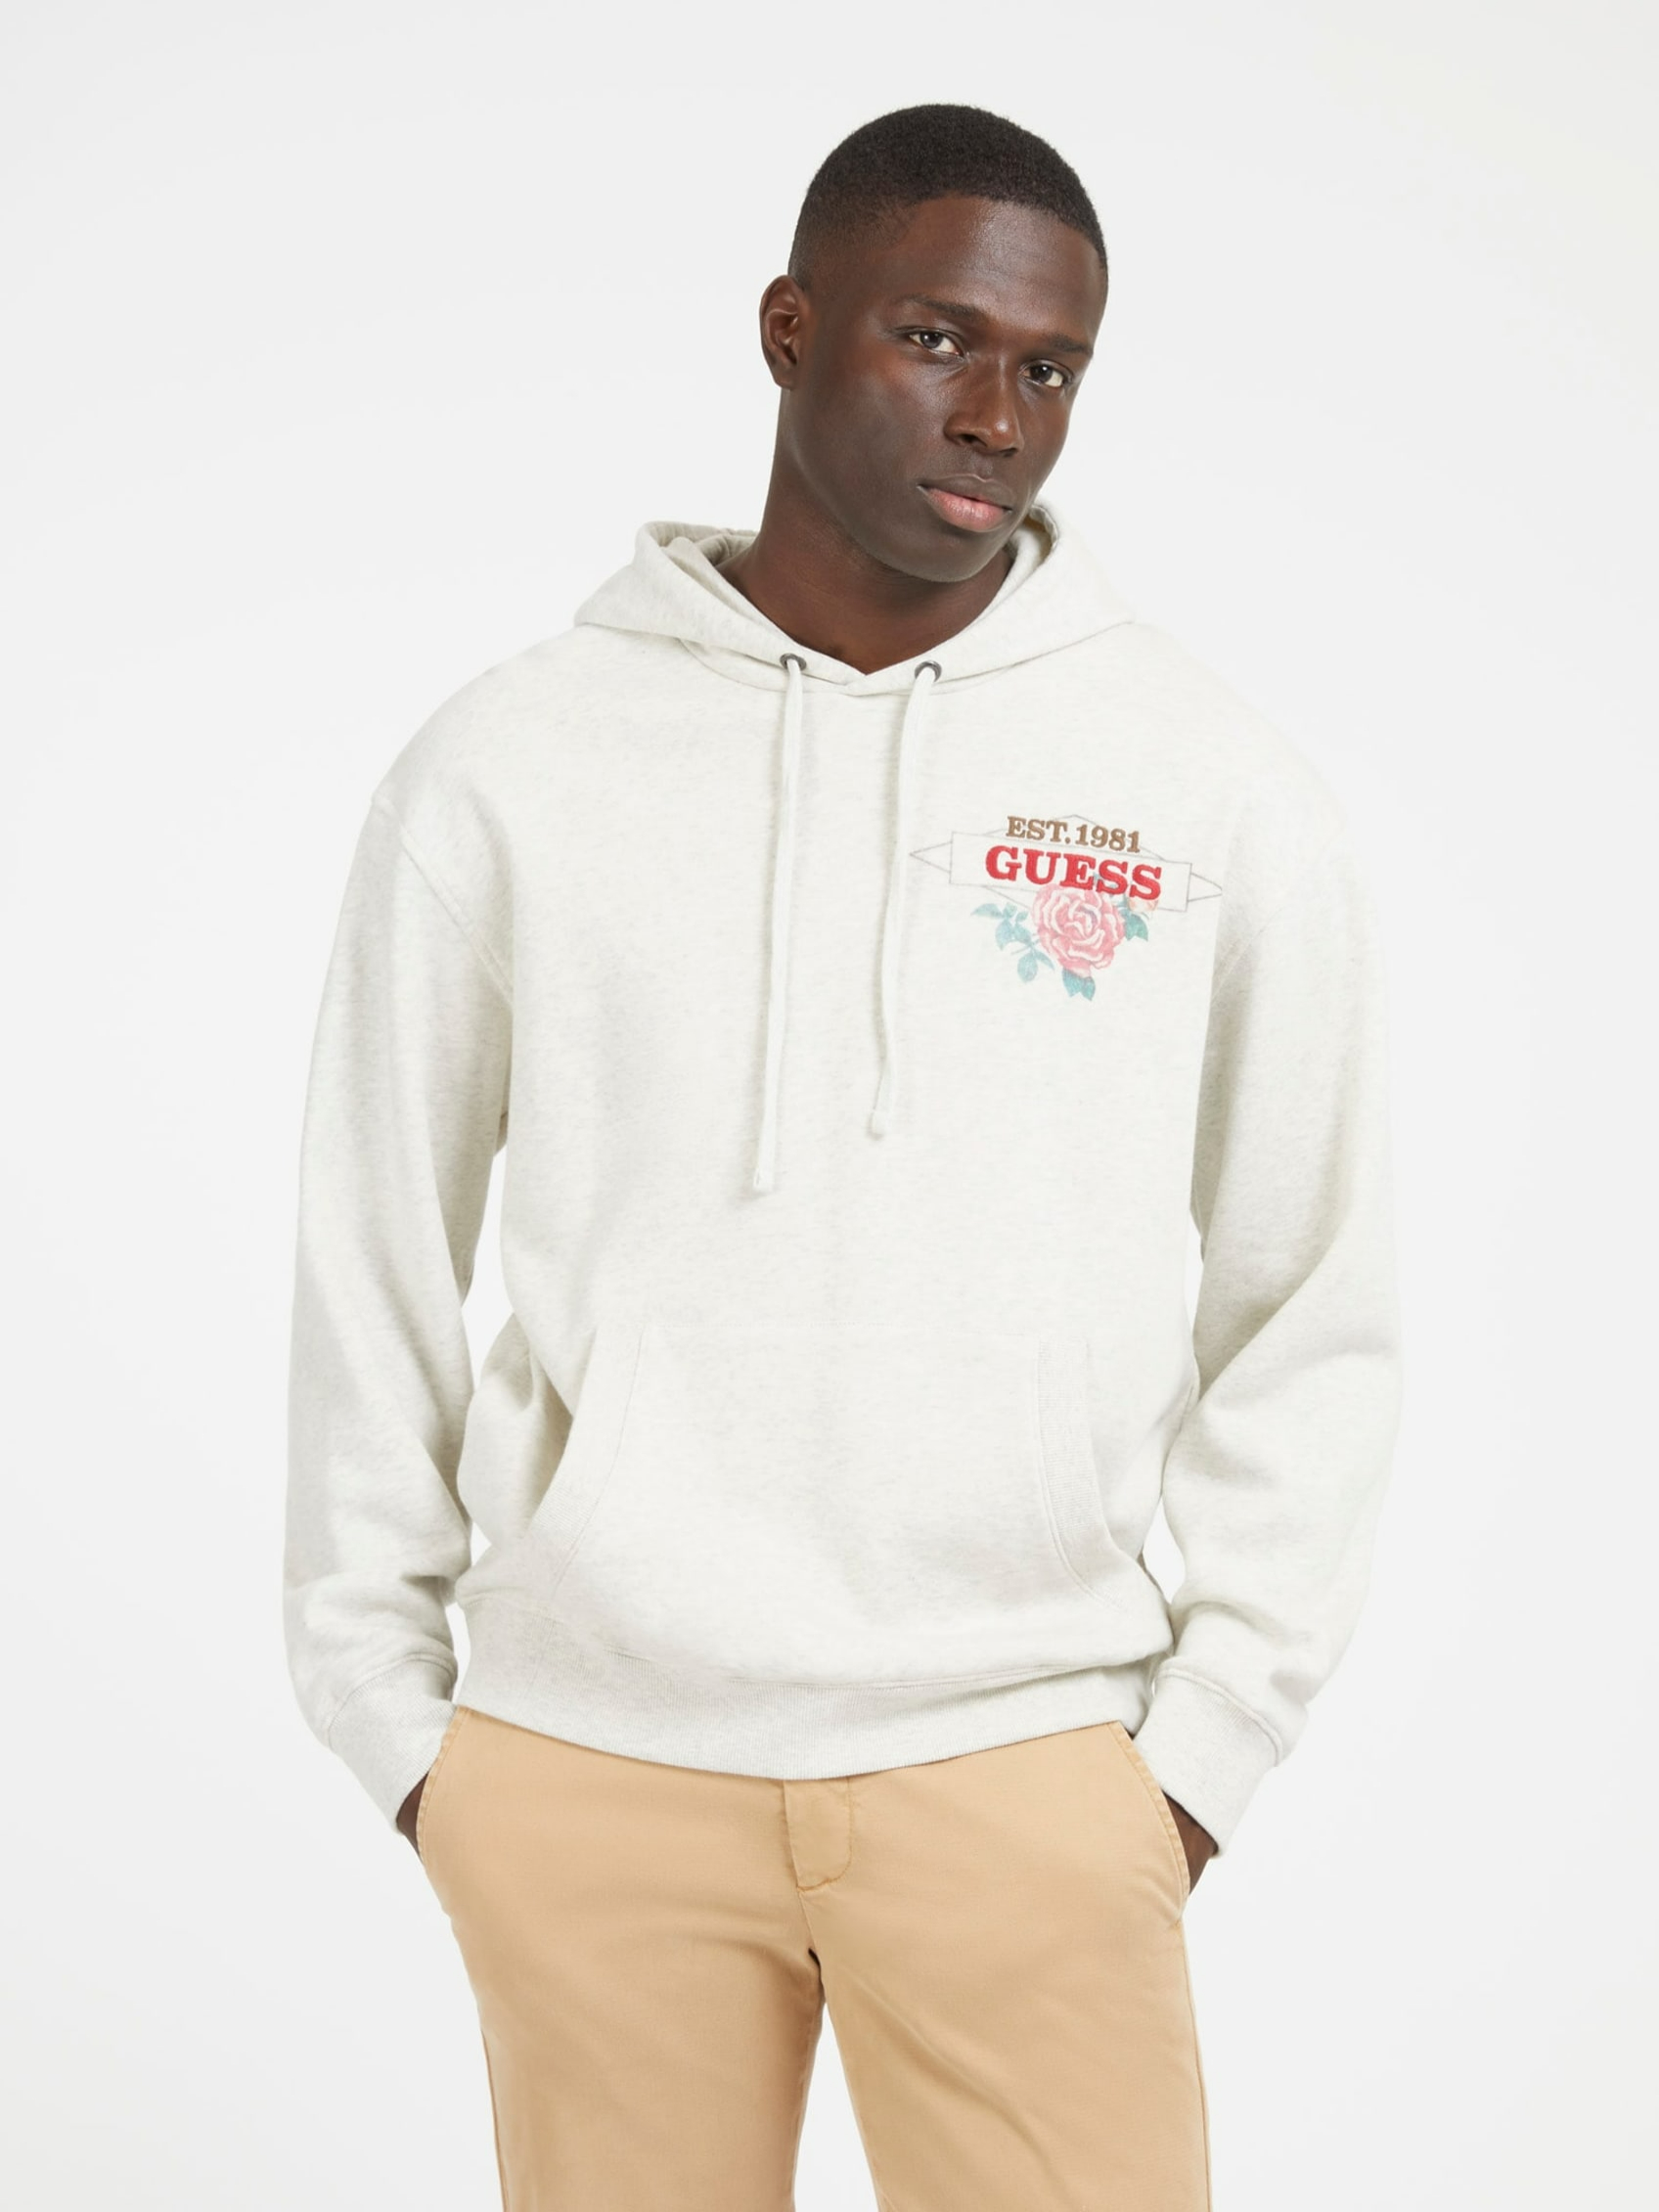 ECO ROY GUESS ROSES HOODIE | Guess Philippines